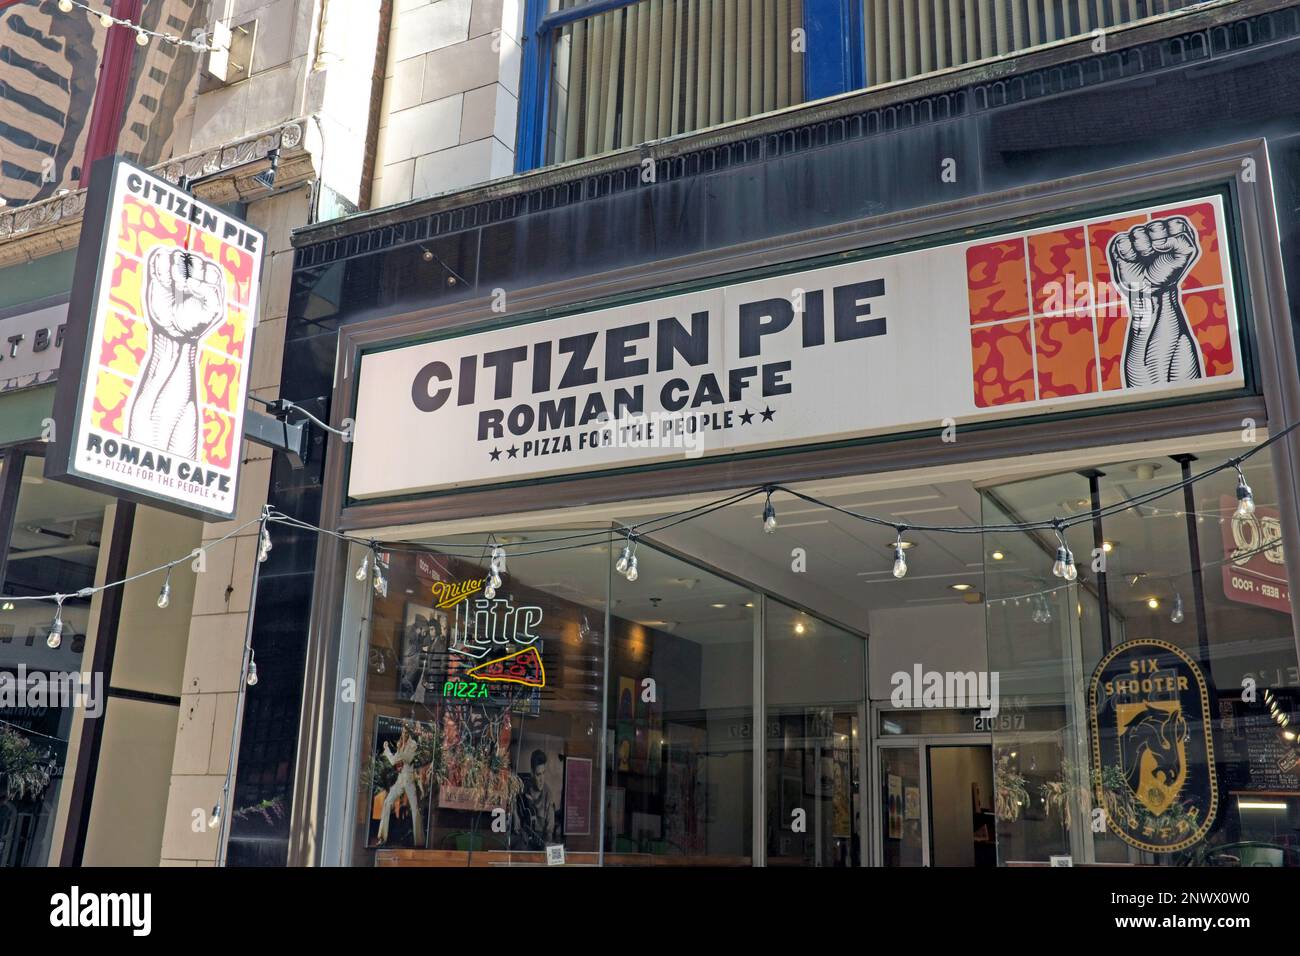 Citizen Pie Roman Cafe Pizza for the People on East 4th Street in the Gateway District in downtown Cleveland, Ohio, USA. Stock Photo